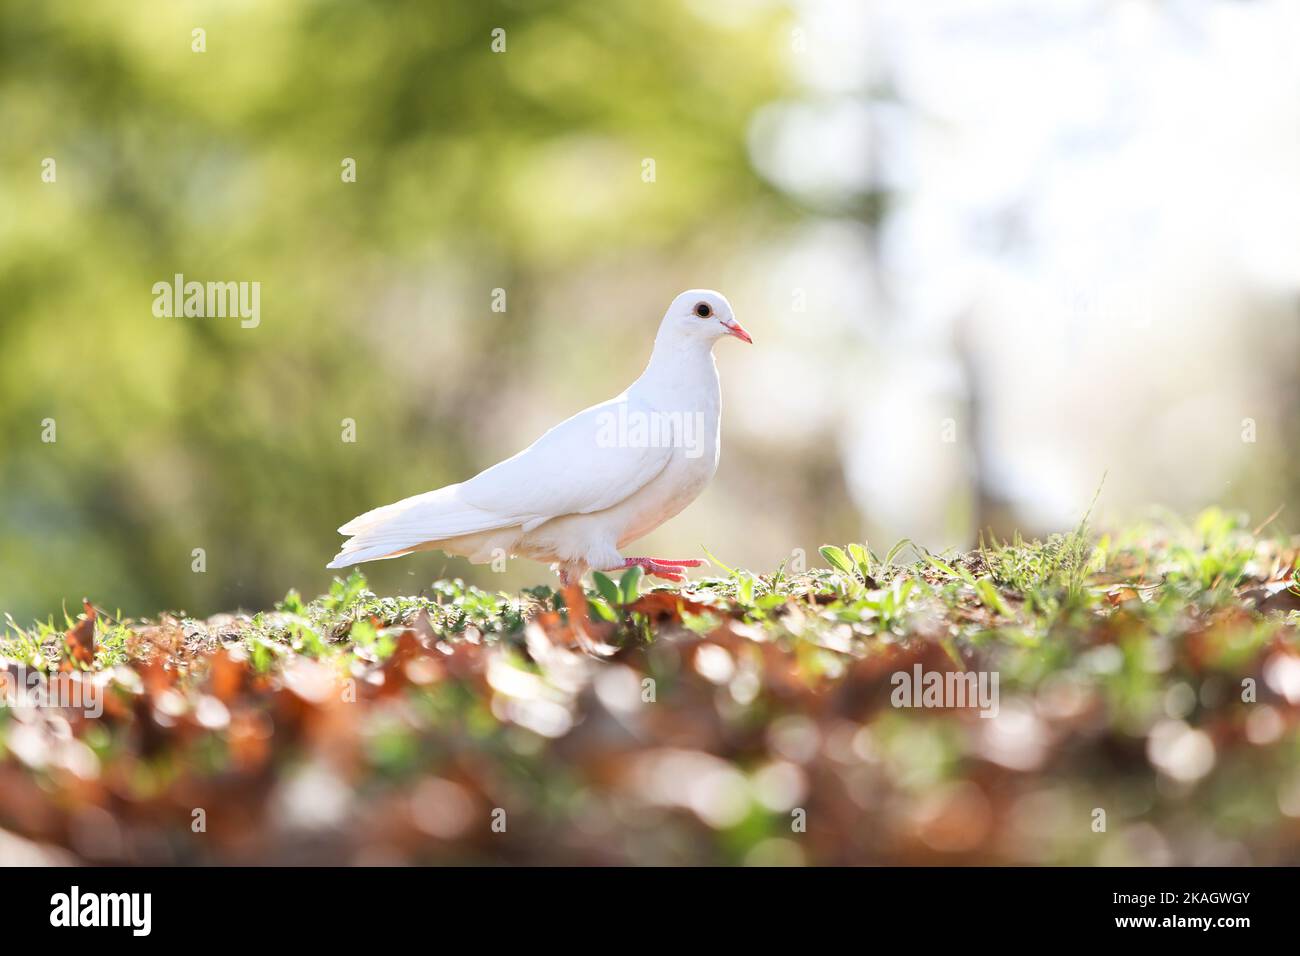 Beautiful white dove symbolizing hope, peace and freedom and bright light background in a forest park Stock Photo